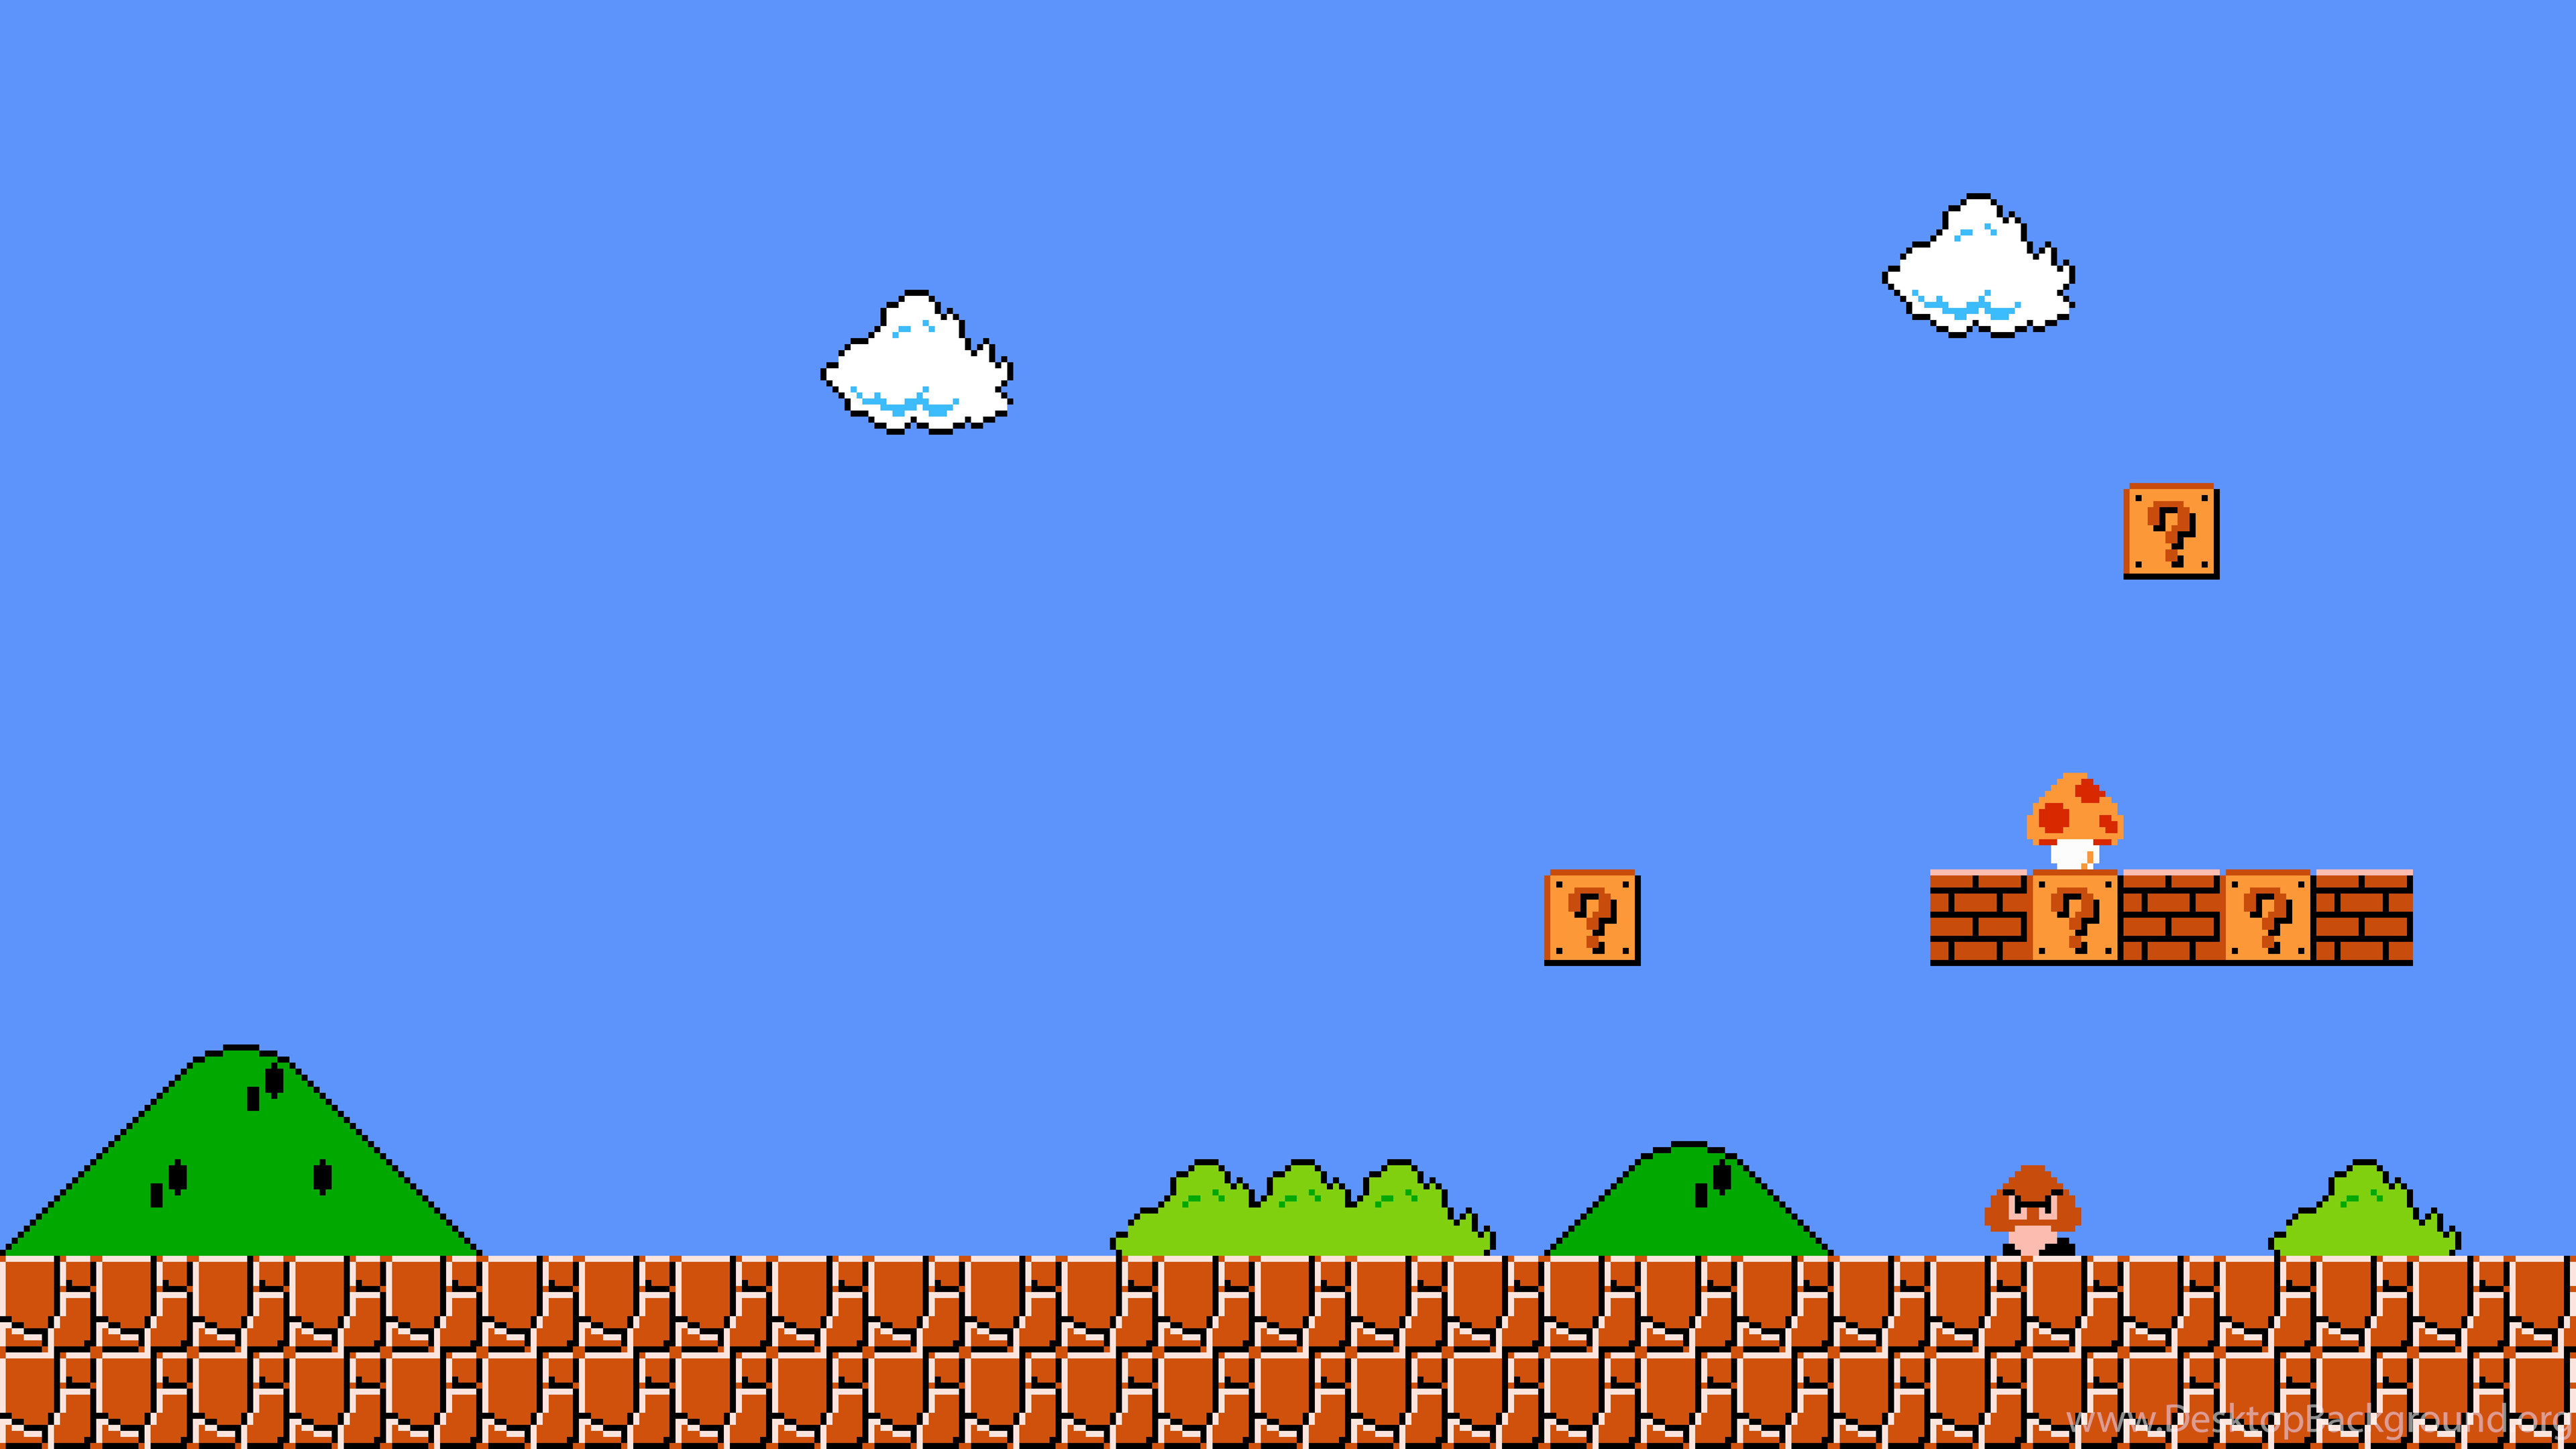 how to download new super mario bros wii on windows pc